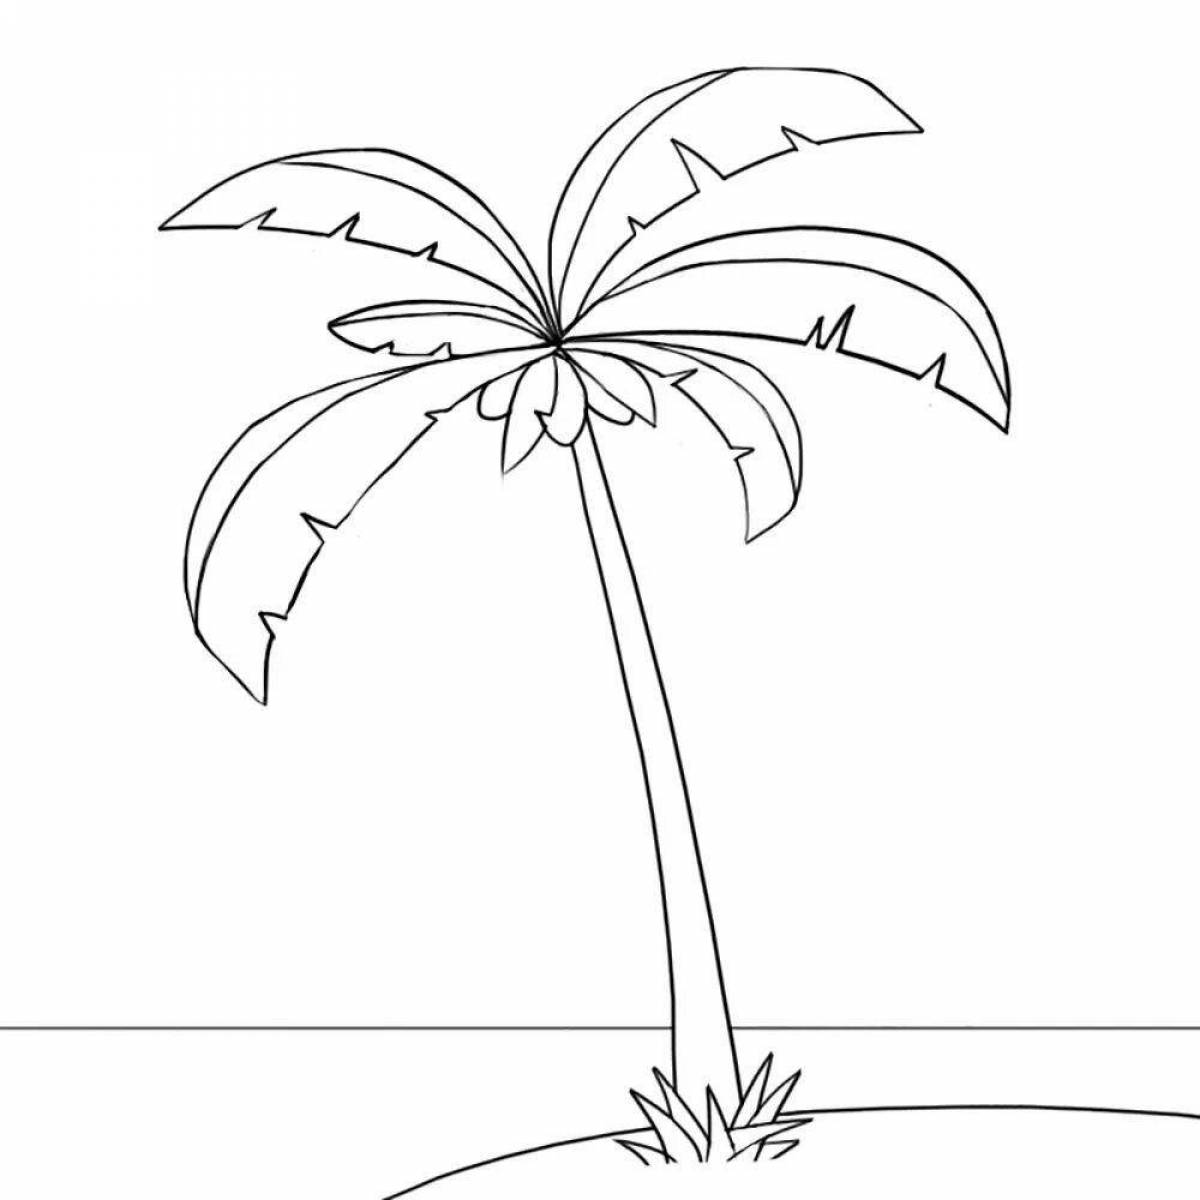 Amazing palm tree coloring book for kids